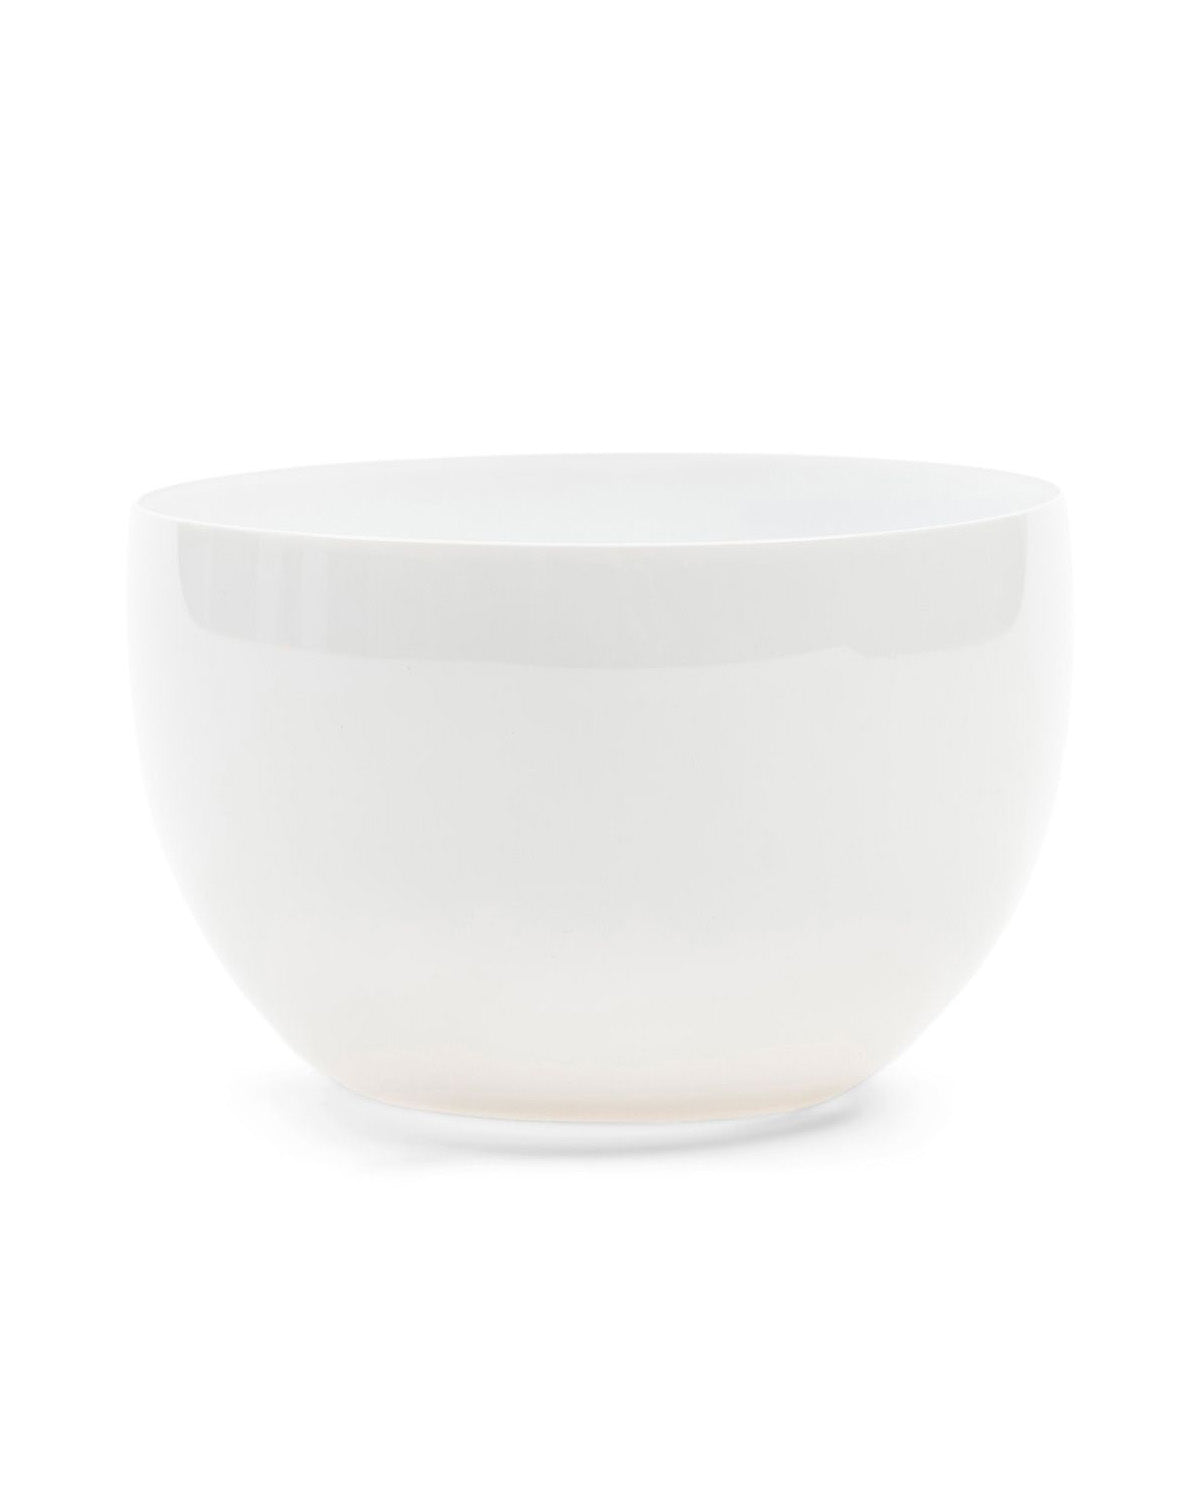 Softly rounded glass bowl in color white by Riviera Maison